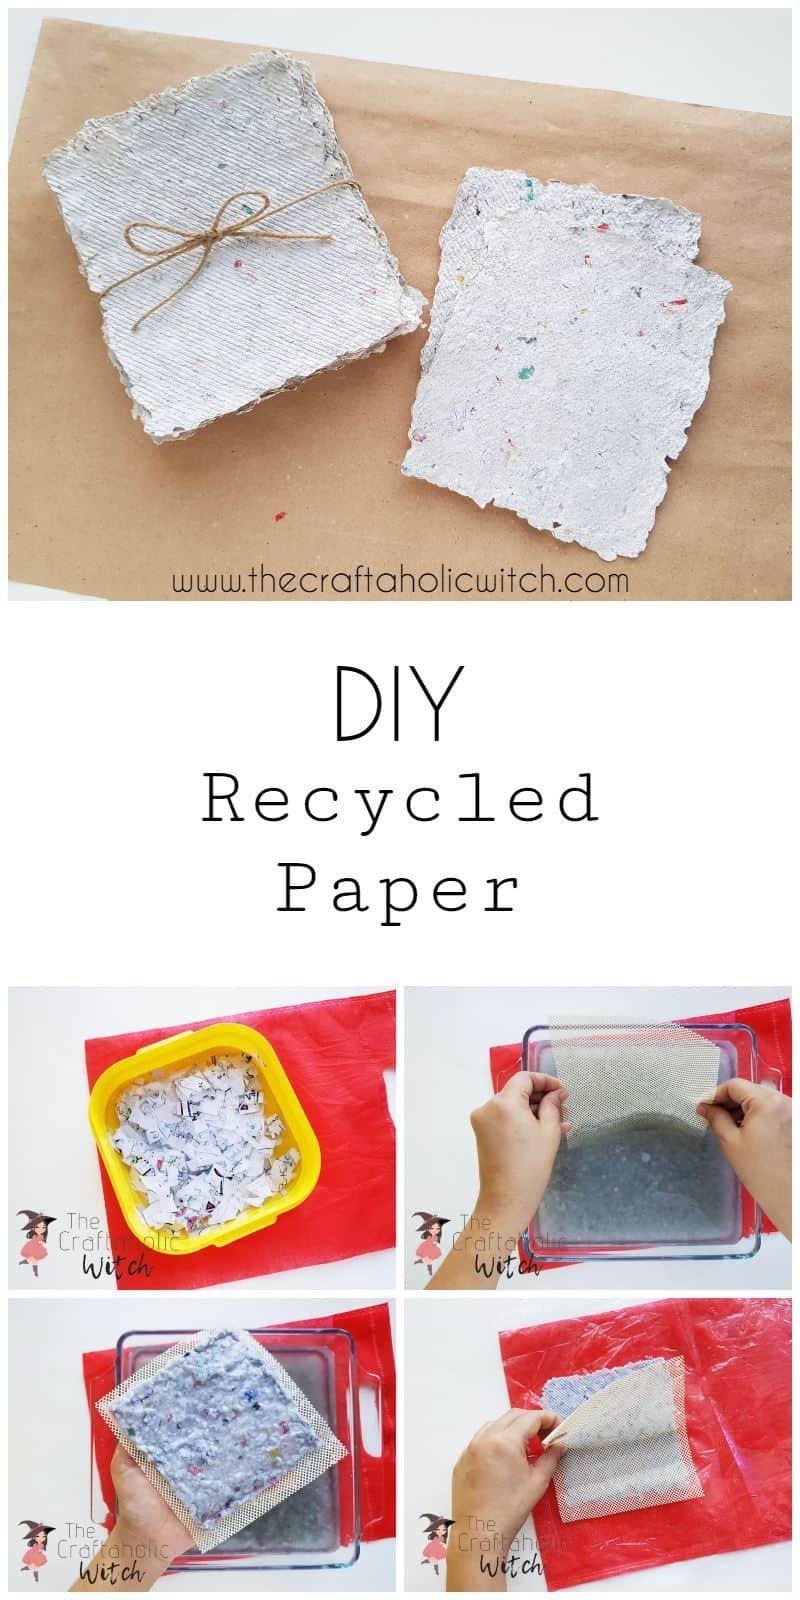 Create artful home décor from recycled paper products